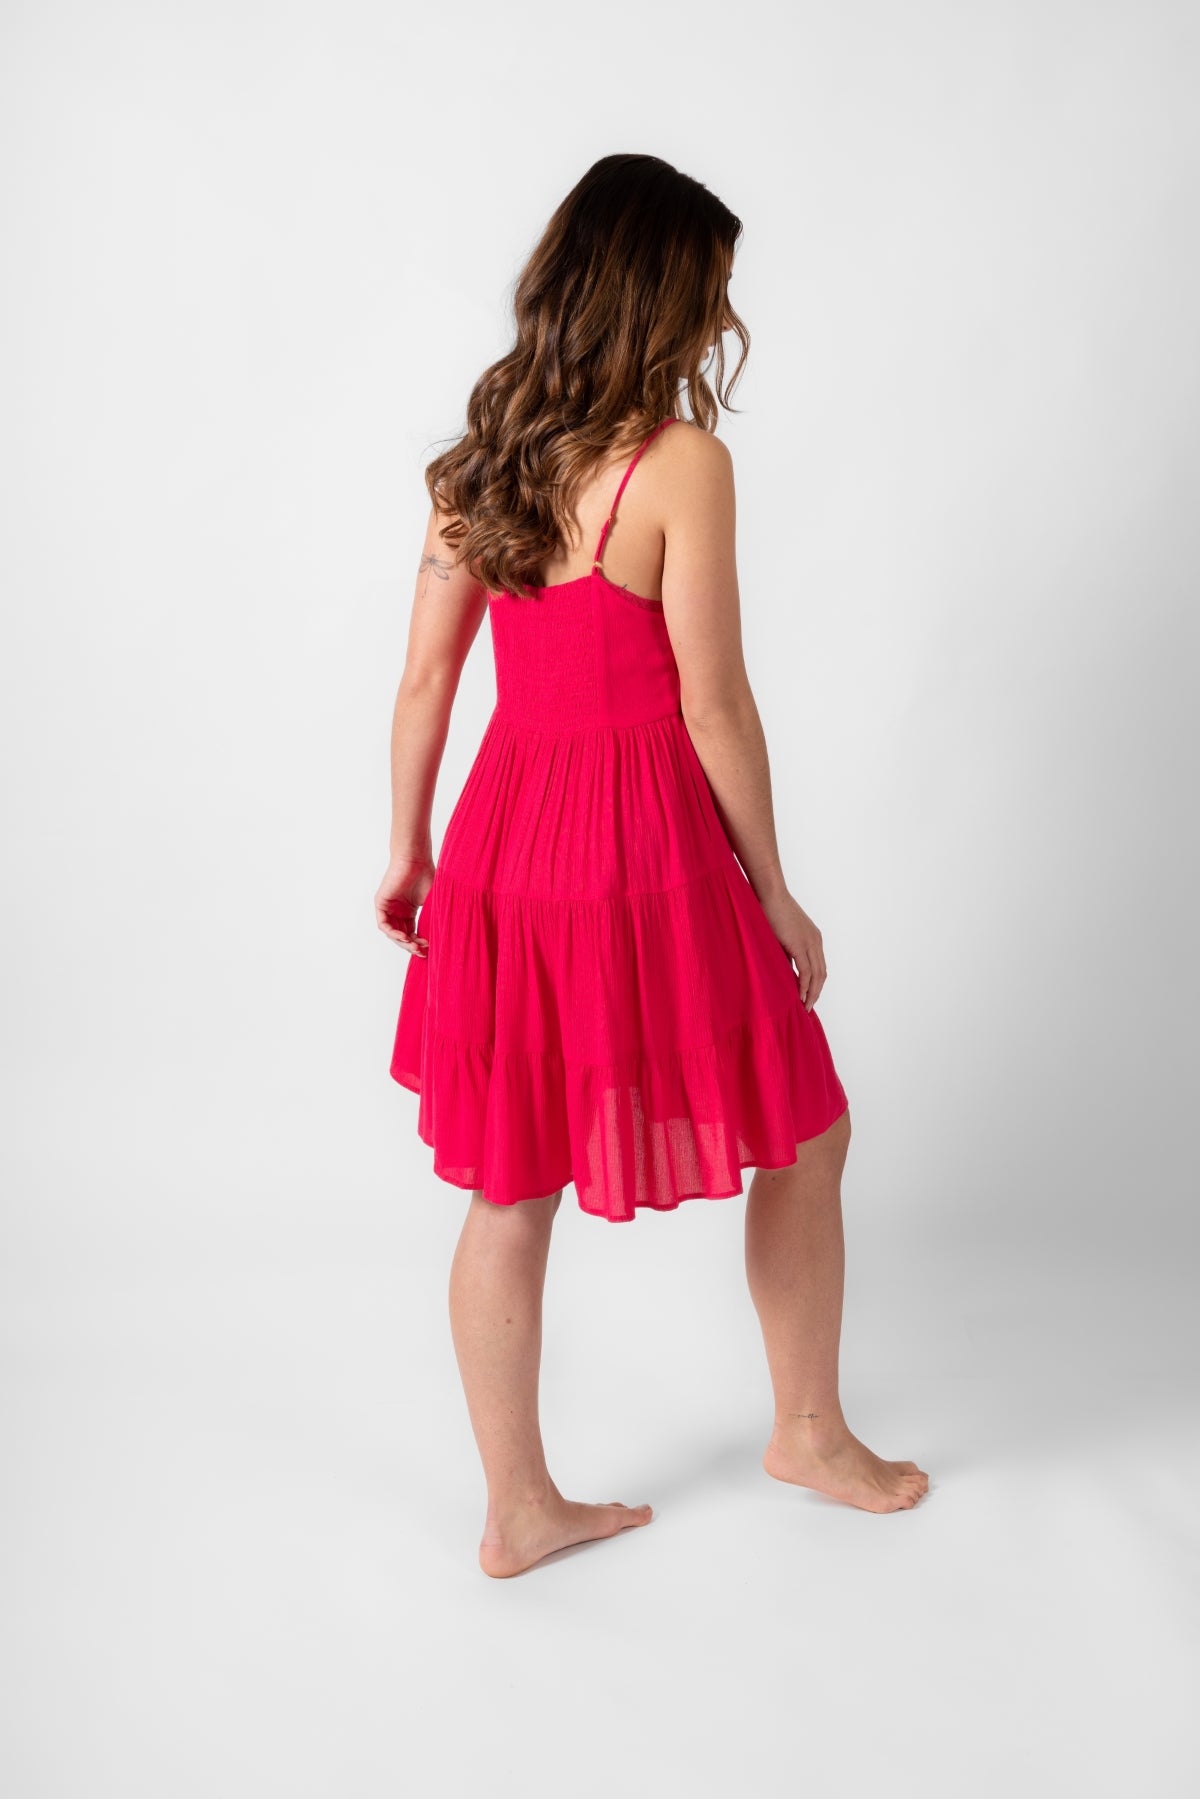 Brunette model facing back, wearing Raspberry Pink Miami Tiered Strappy Mini Dress. The dress features adjustable straps, a flirty tiered empire silhouette, and is crafted from lightweight rayon for a comfortable feel. It includes a smocked back, is lined in white, and has pockets, making it both stylish and practical. Koy Resort affordable vacation, cruise, and resort-wear.